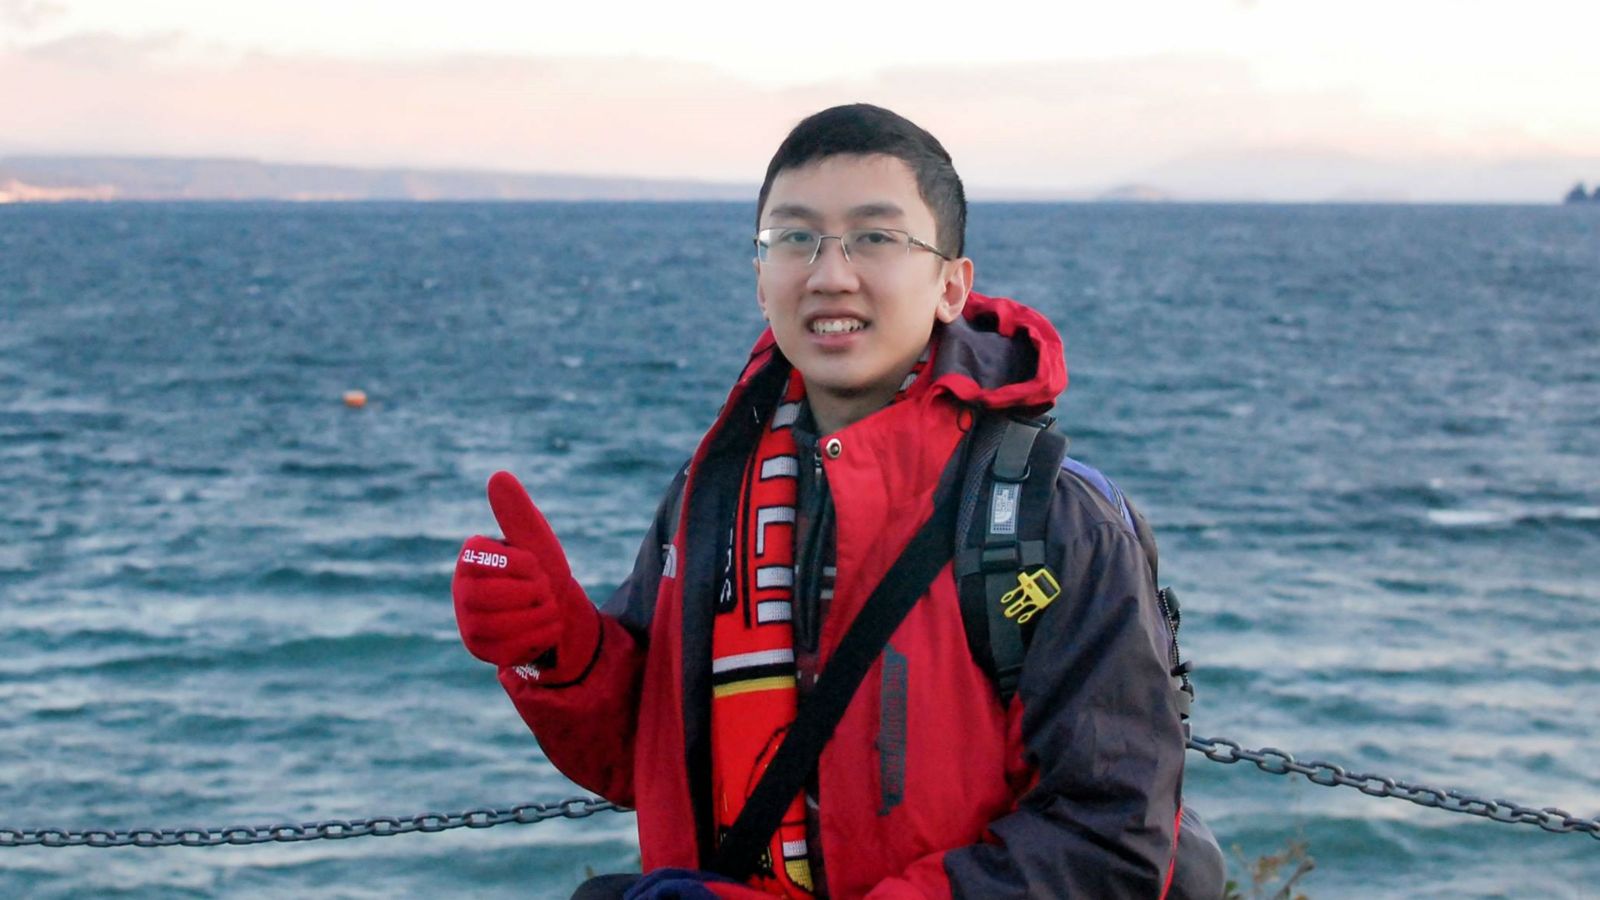 Quan Trong Nguyen in a big red jacket gives a gloved thumbs-up before a body of blue water and coastline in the offing.